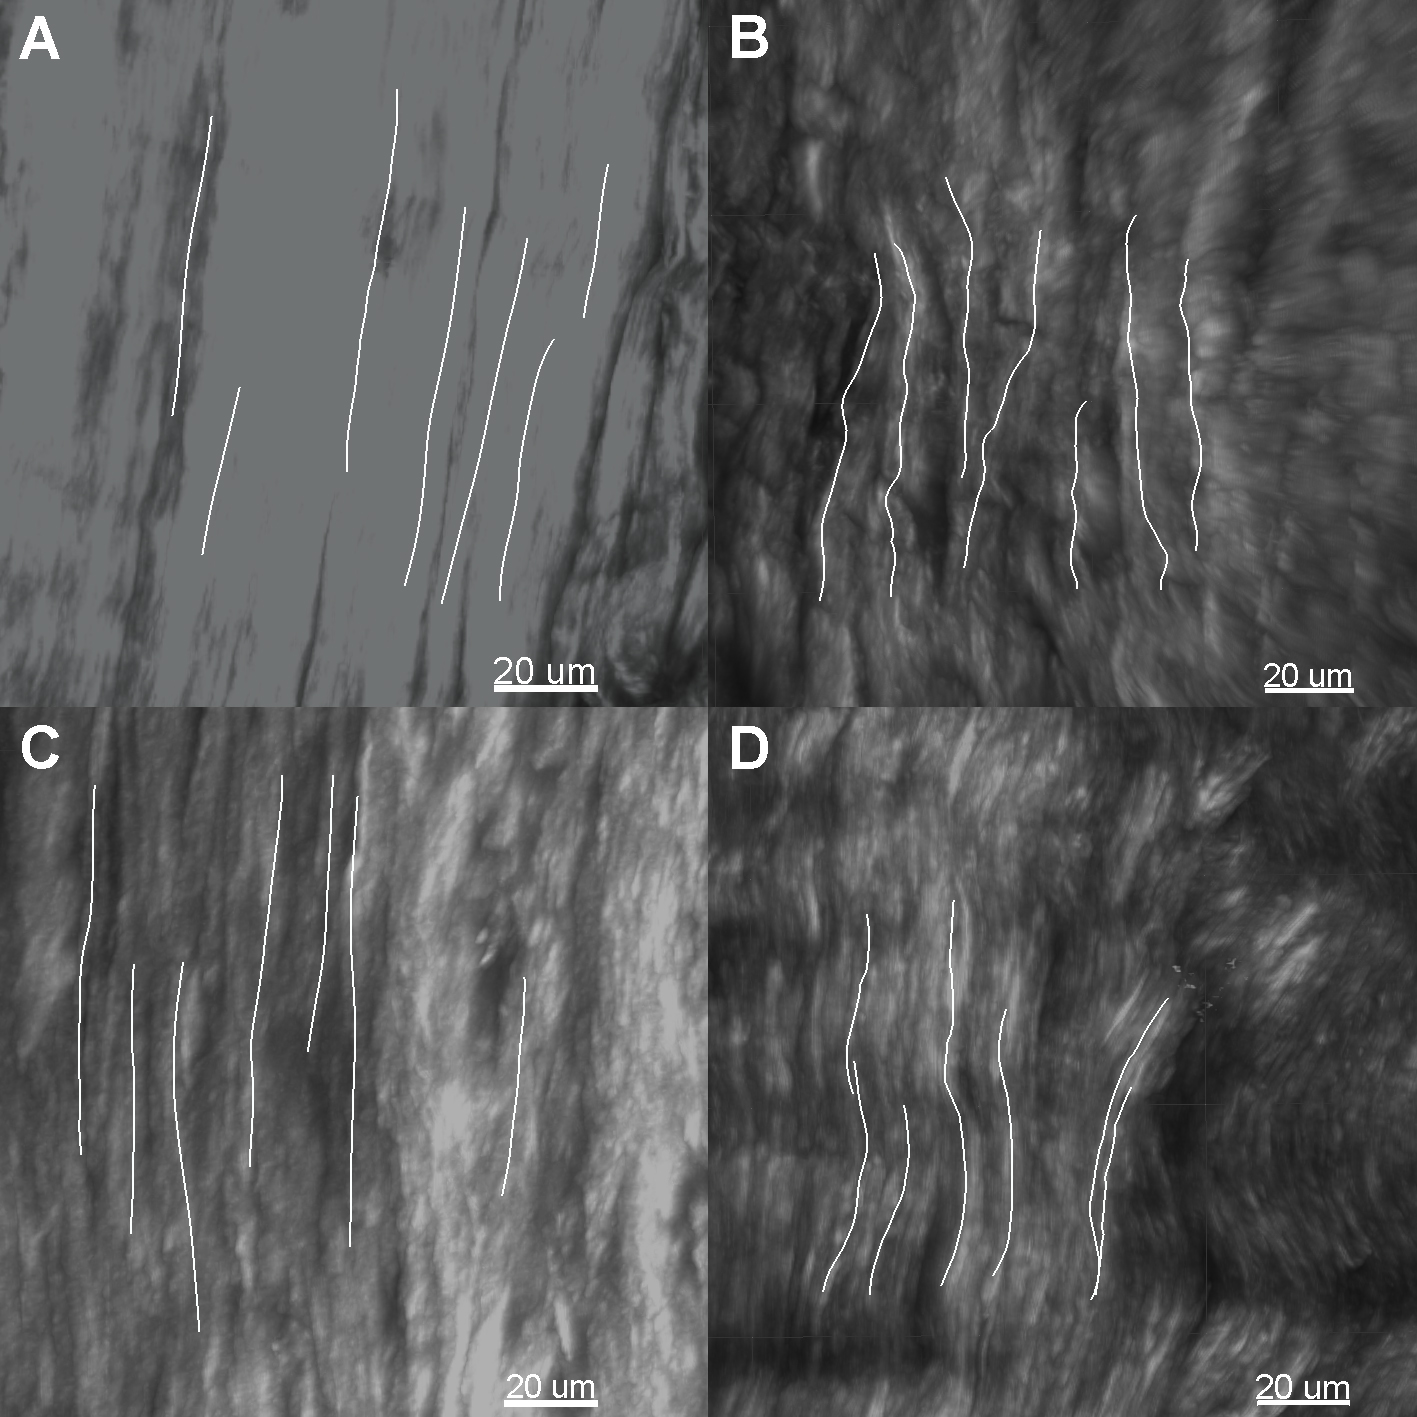 Representative collagen fiber straightness measurement of the outer region of the menisci. A) Medial meniscus of the control group. B) Medial meniscus of the experimental group. C) Lateral meniscus of the control group. D) Lateral meniscus of the experimental group.